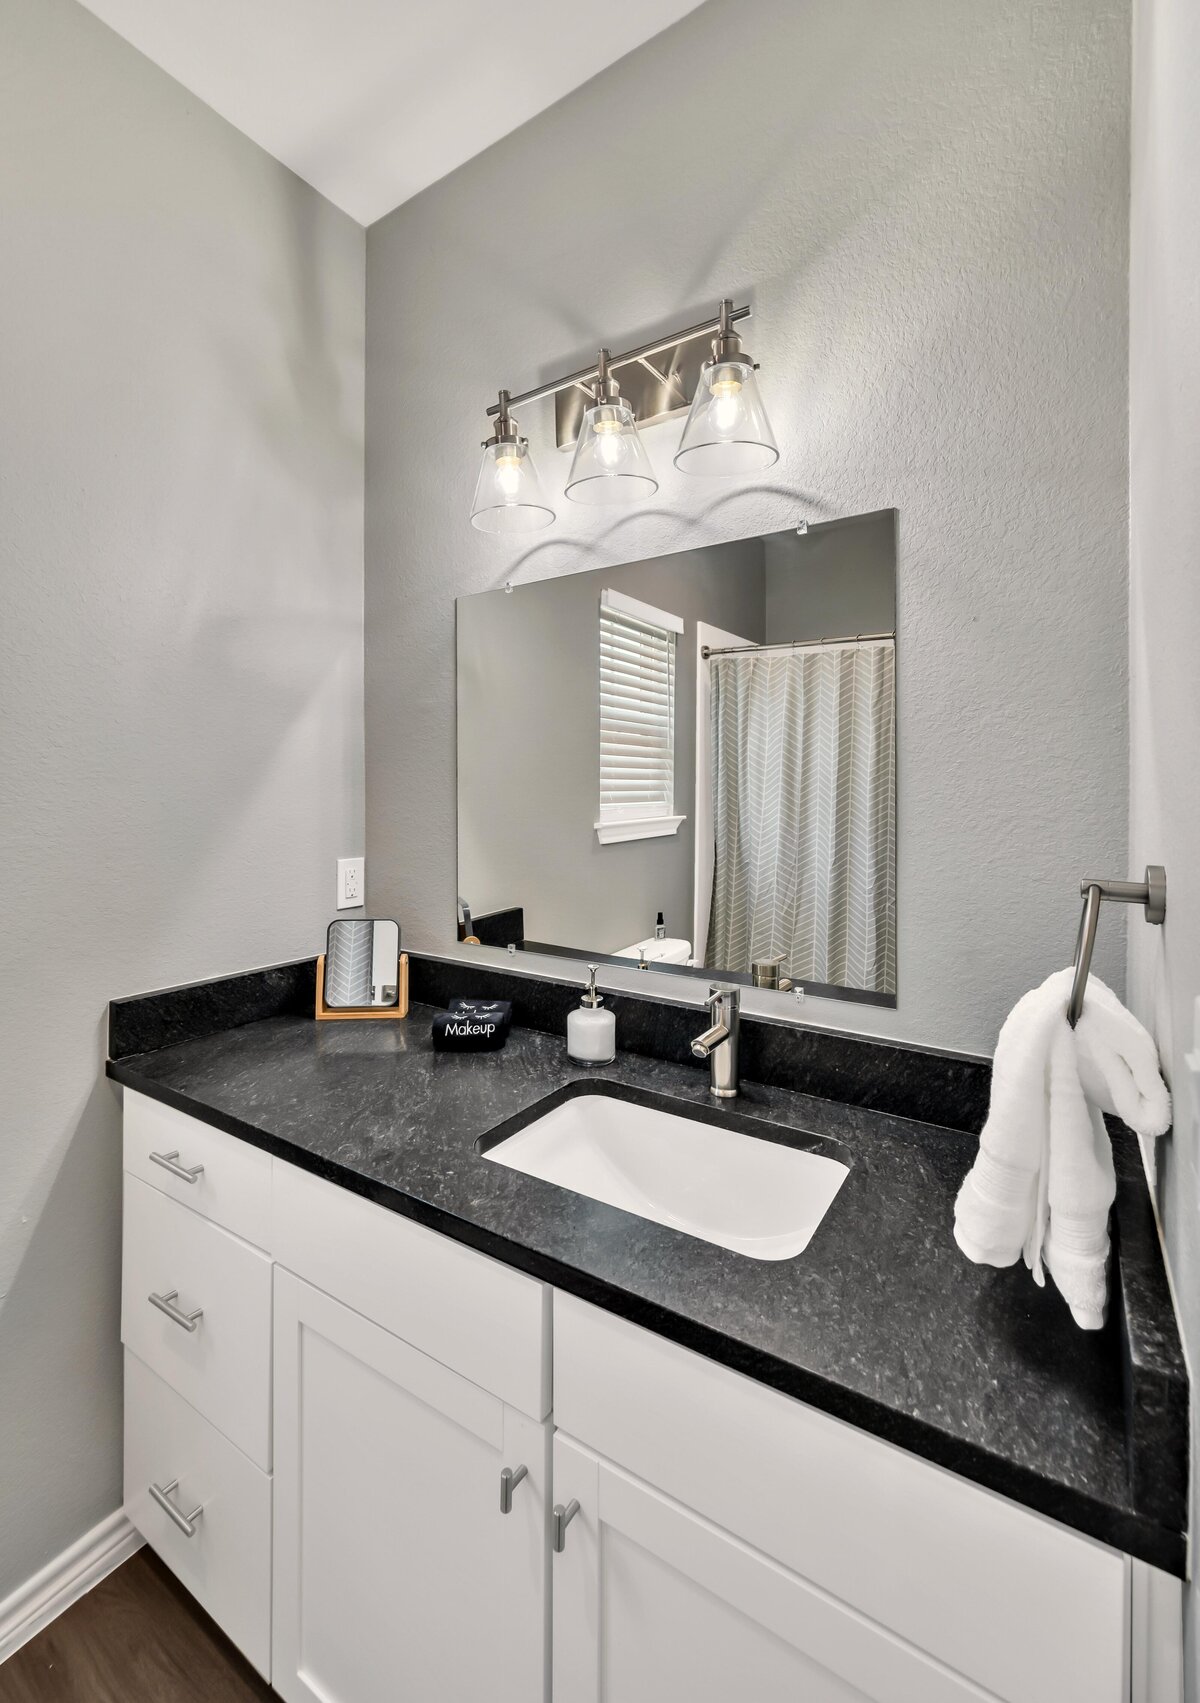 Large bathroom vanity in the bathroom of this four-bedroom, 4.5 bathroom new construction vacation rental house with free wifi, fire pit, gazebo, cornhole, private bathrooms for each bedroom within walking distance of Magnolia and Baylor in downtown Waco, TX.